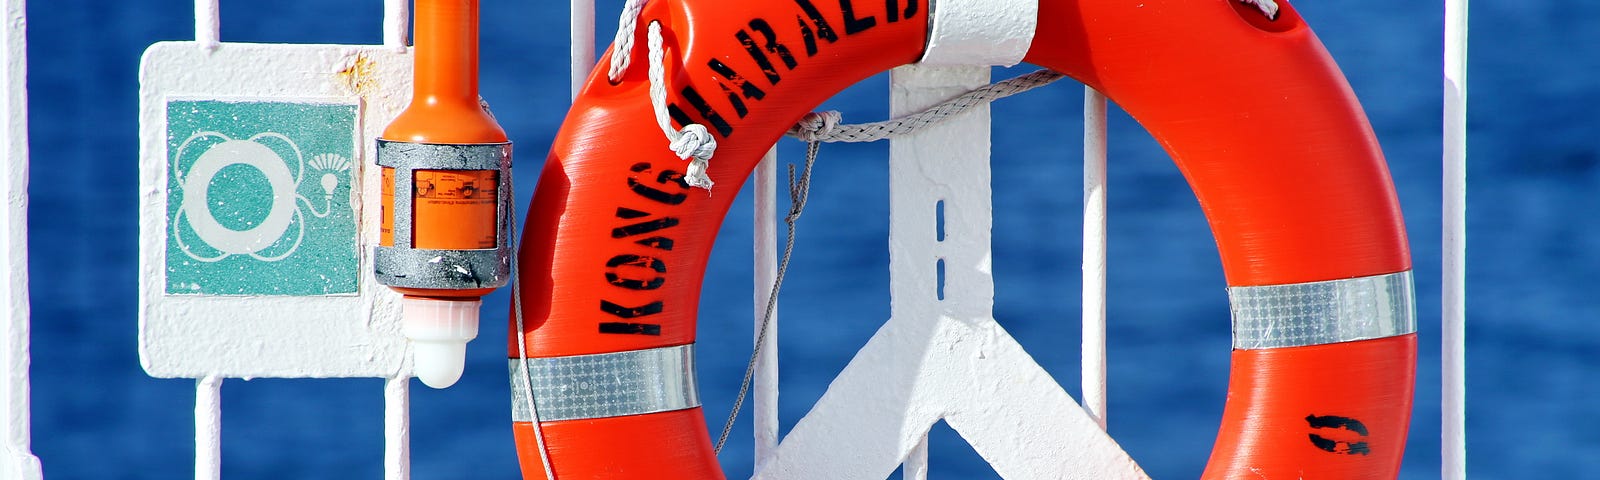 Bright blue background with white fence from which hangs a bright orange life saving device